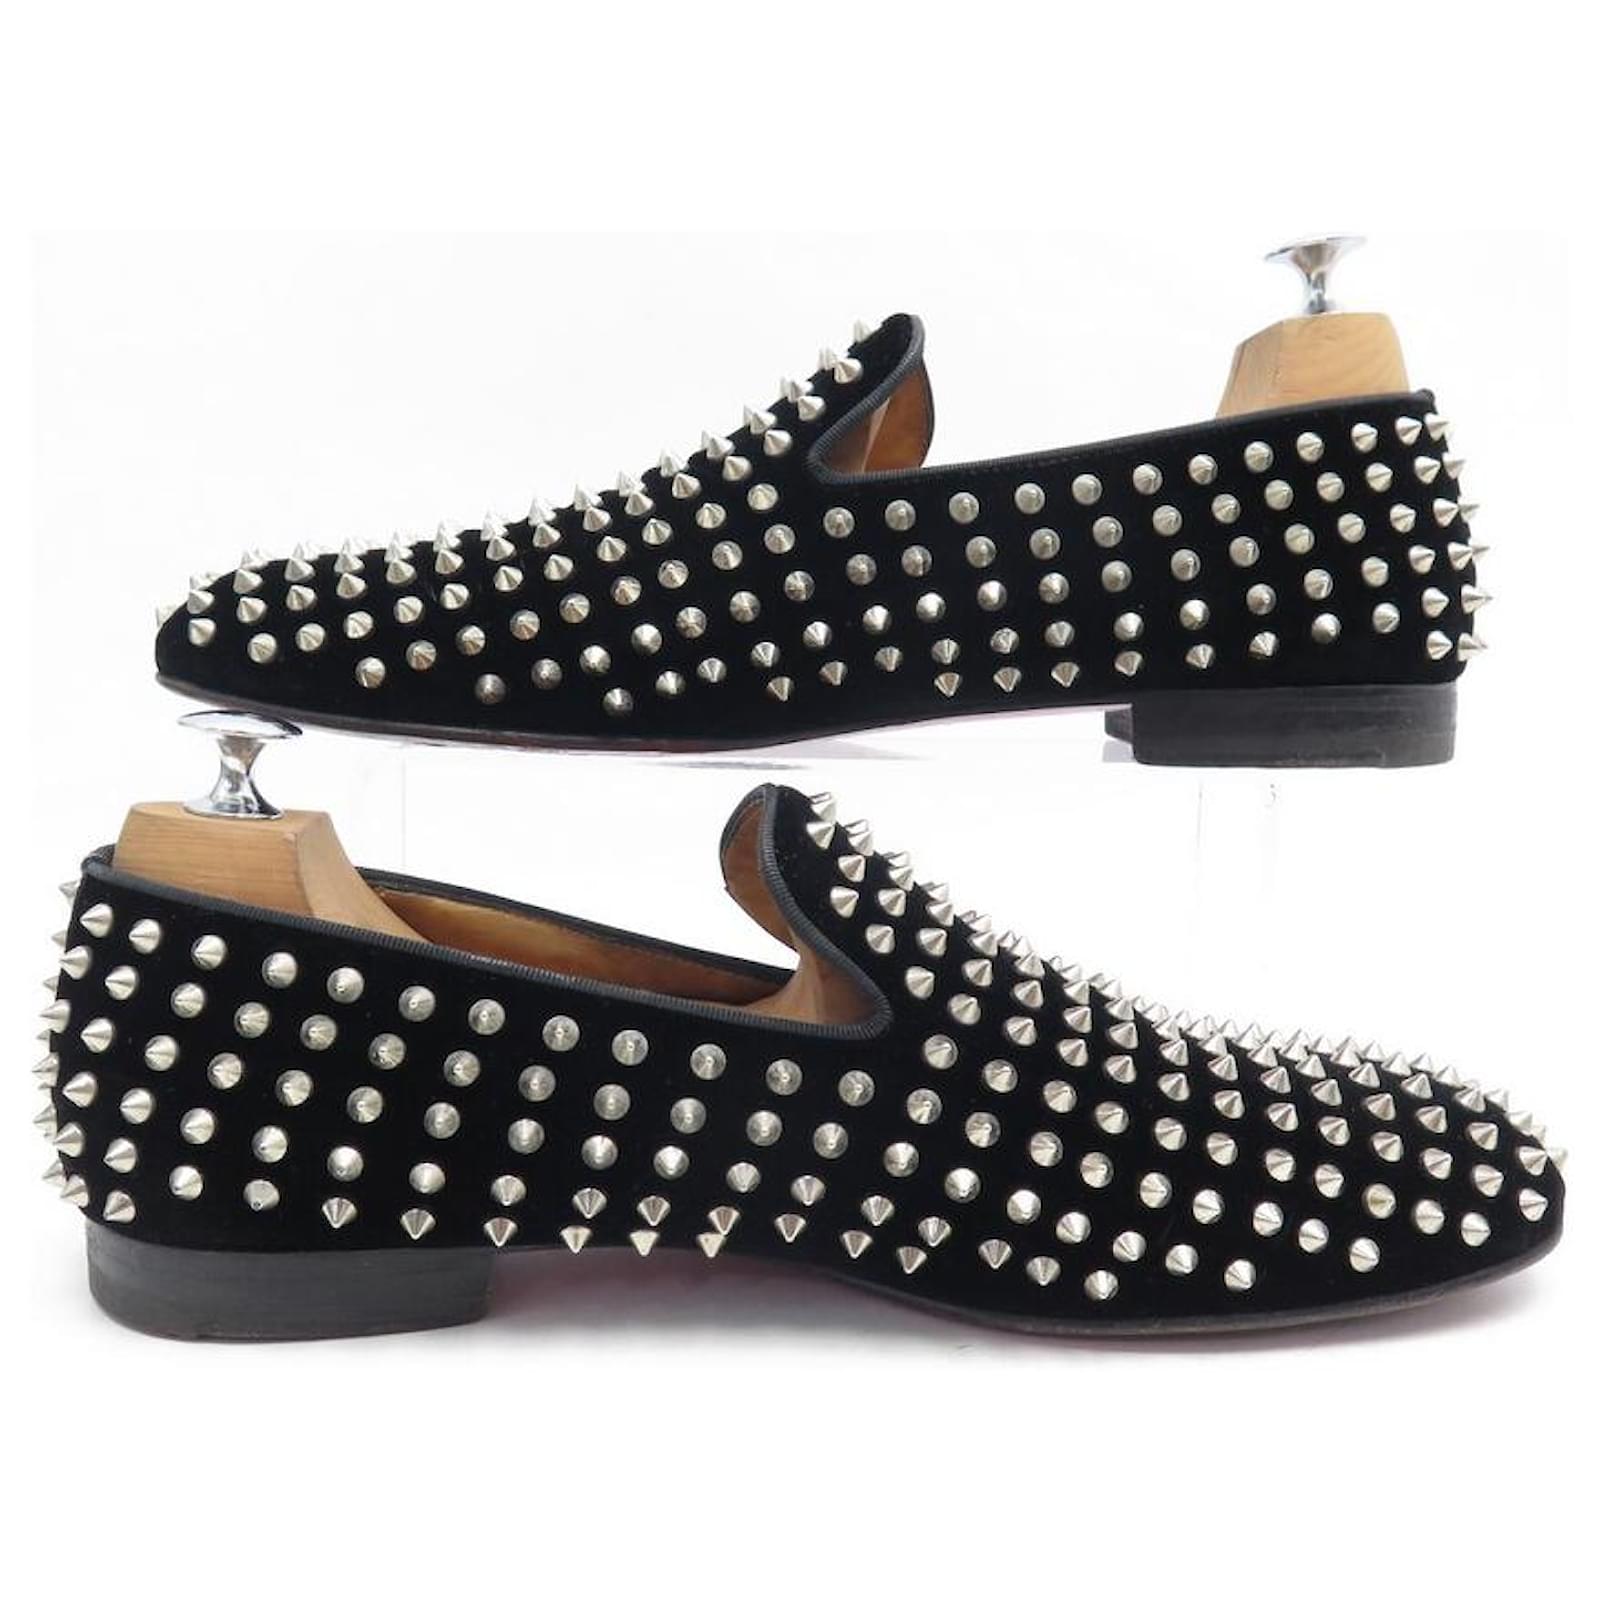 Louis Vuitton, Shoes, Great Condition Christian Louboutin Mens Dandelion  Spike Loafers Size 45